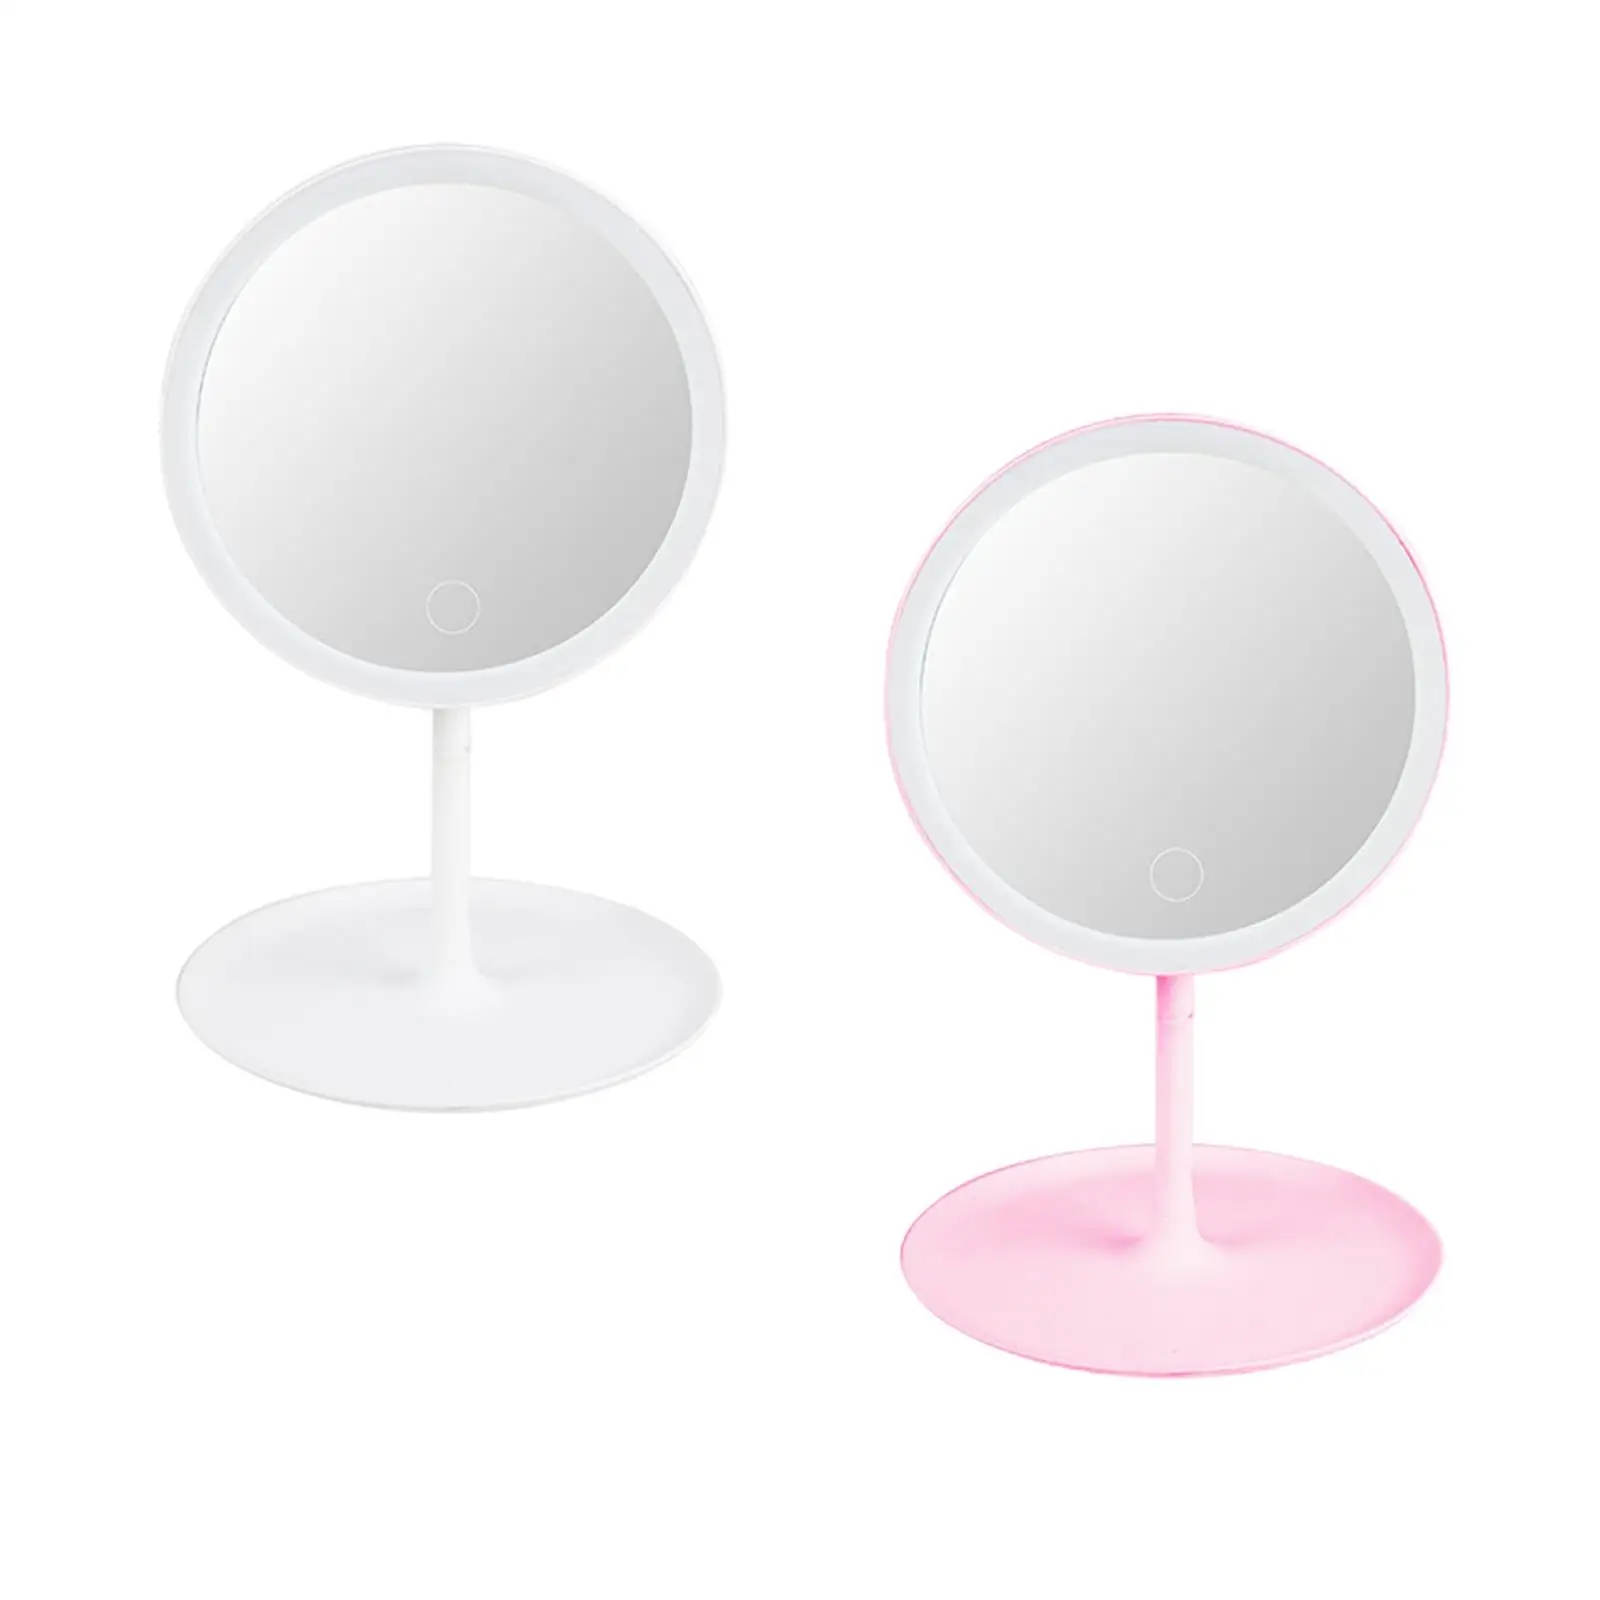 Detachable Makeup Lights USB Rechargeable for Dressing Table